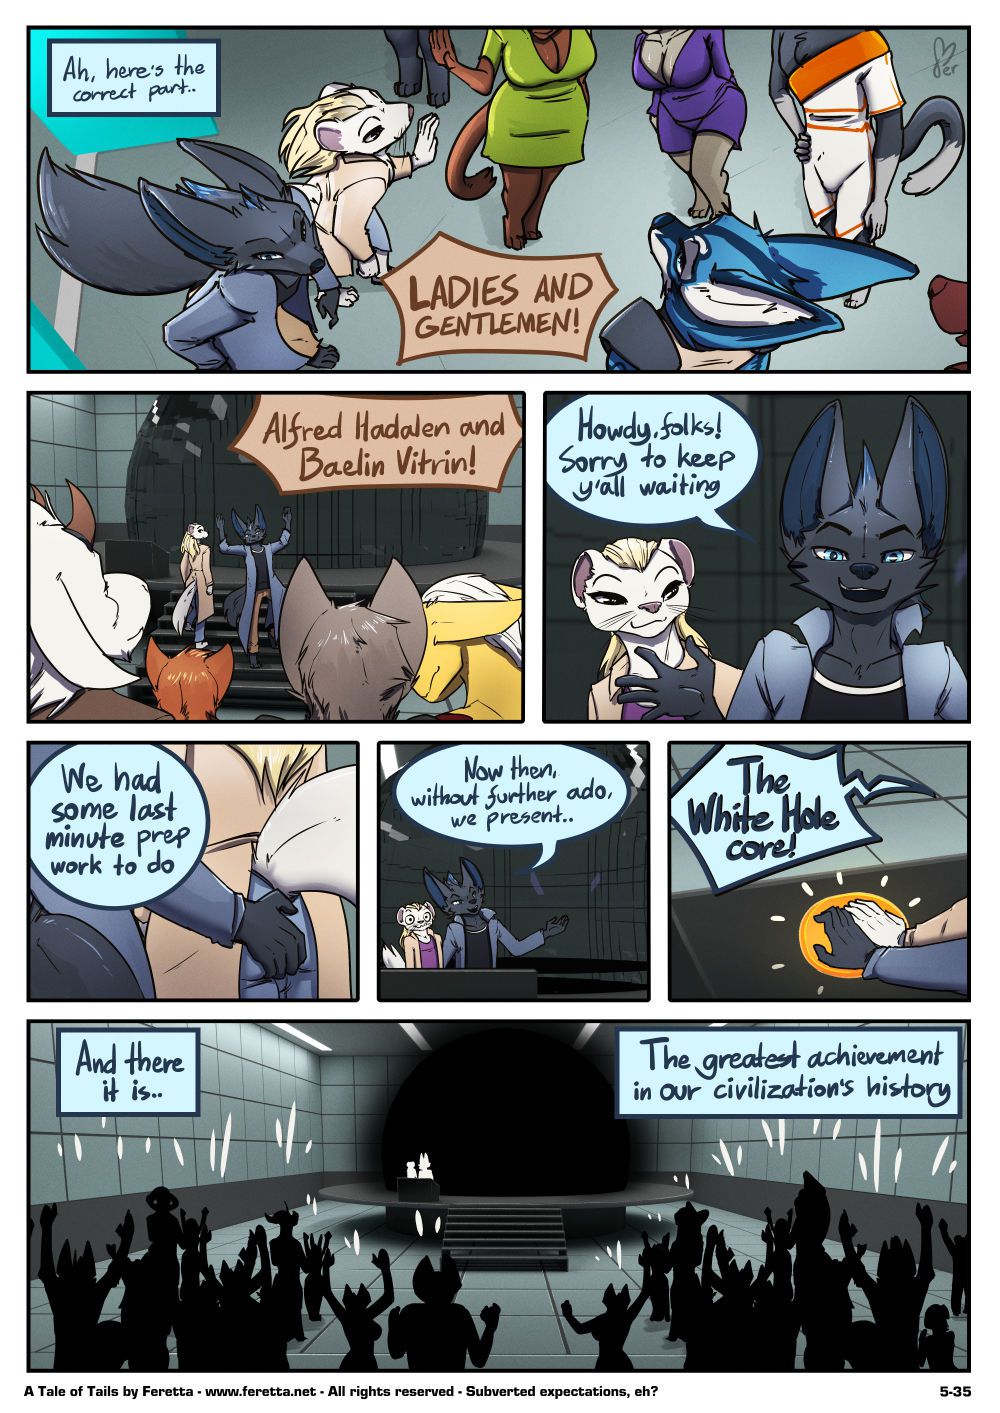 [Feretta] Farellian Legends: A Tale of Tails (w/Extras) [Ongoing] 247